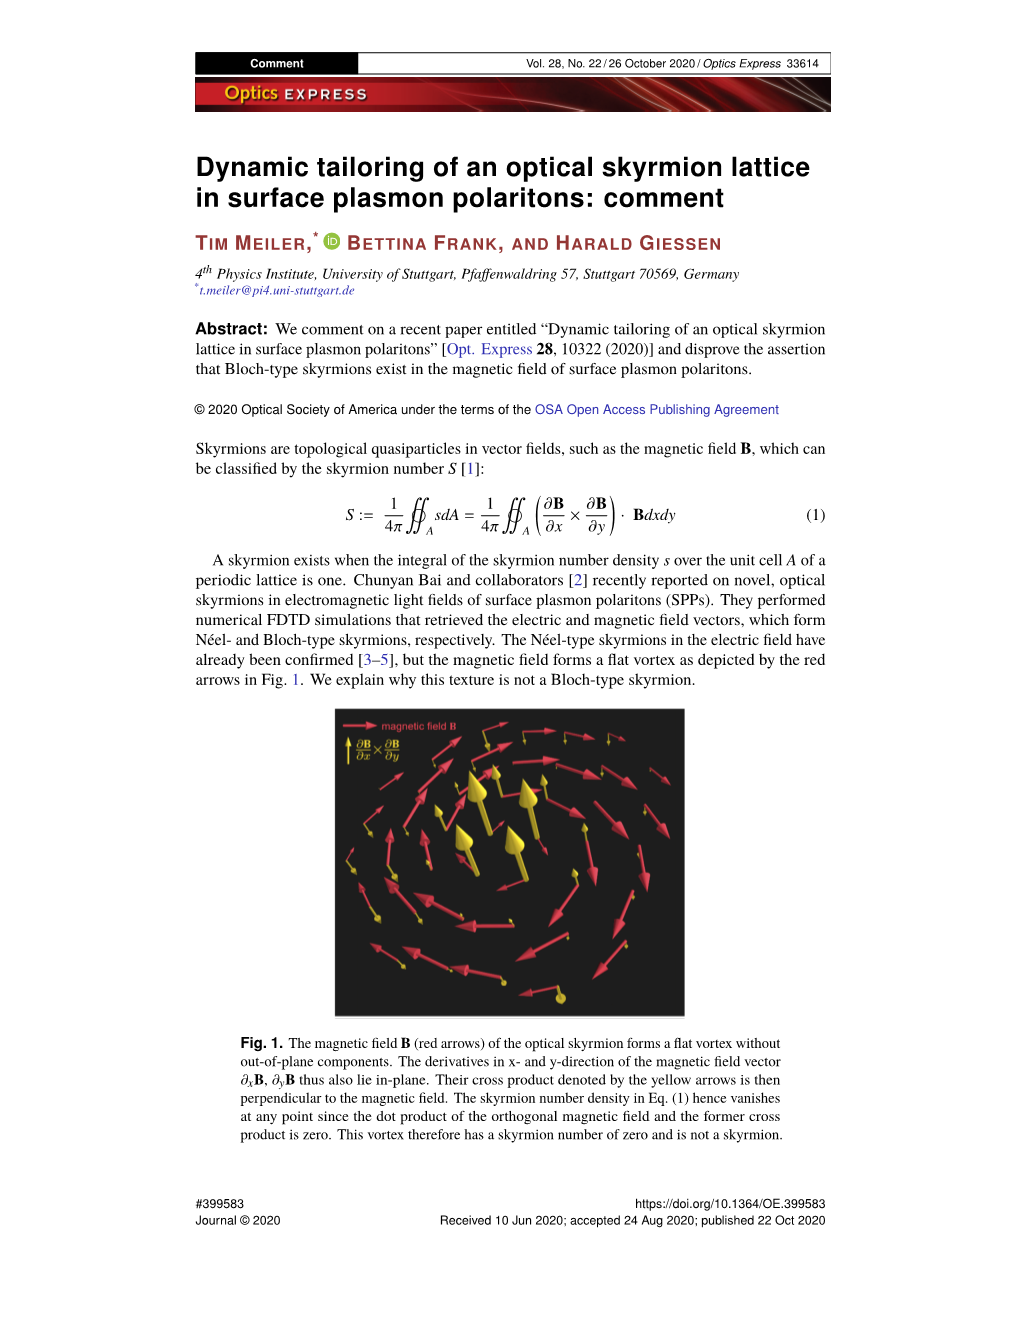 Dynamic Tailoring of an Optical Skyrmion Lattice in Surface Plasmon Polaritons: Comment